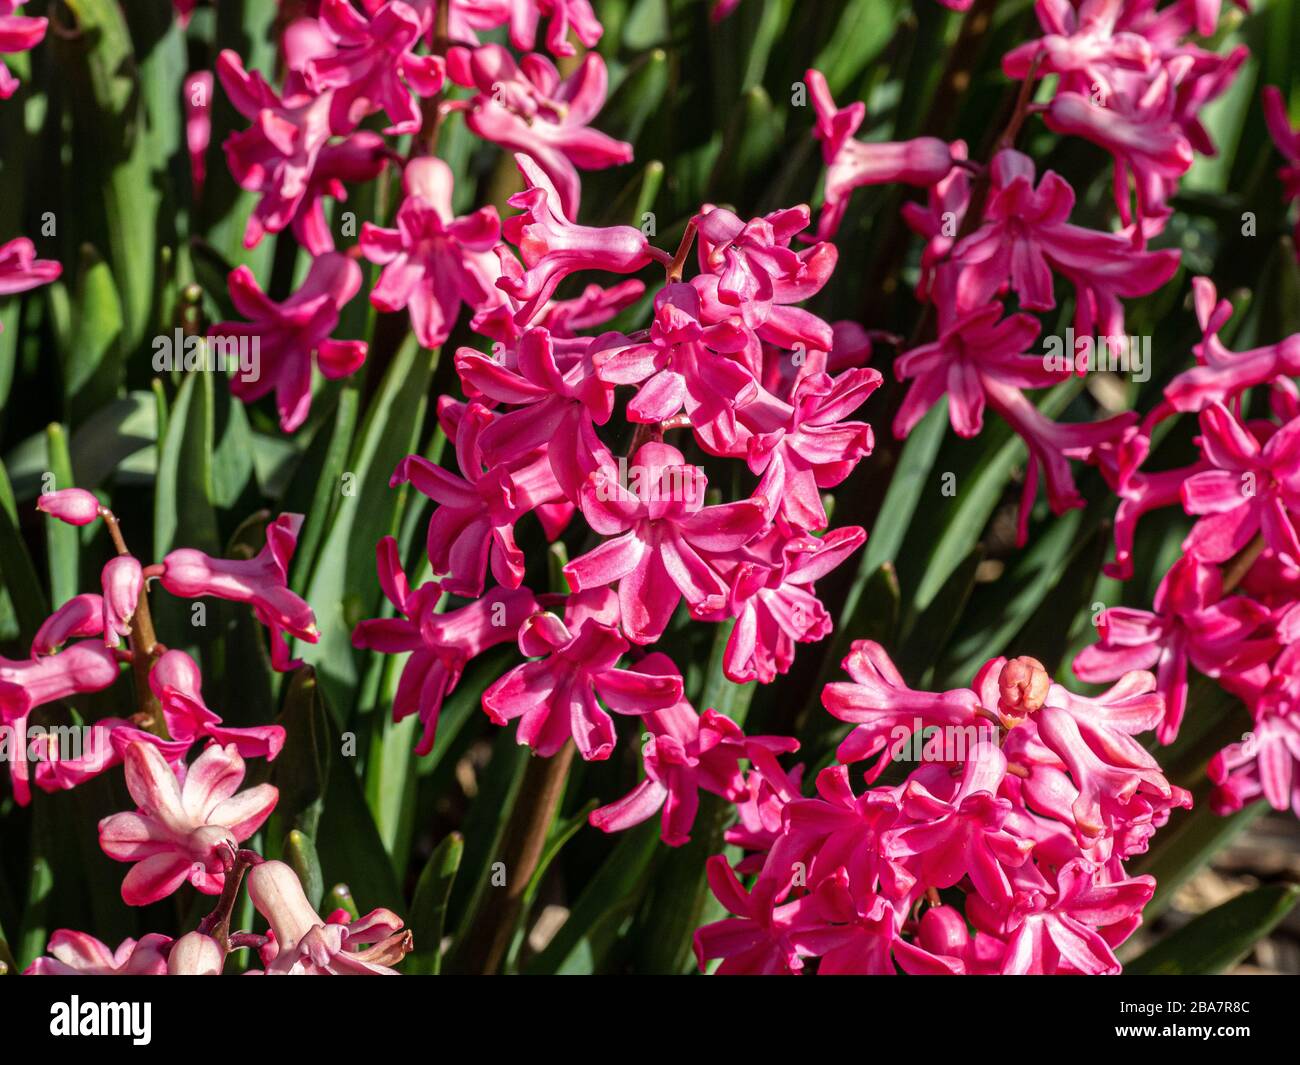 A close up of a group of deep pink hyacinth flowers Stock Photo